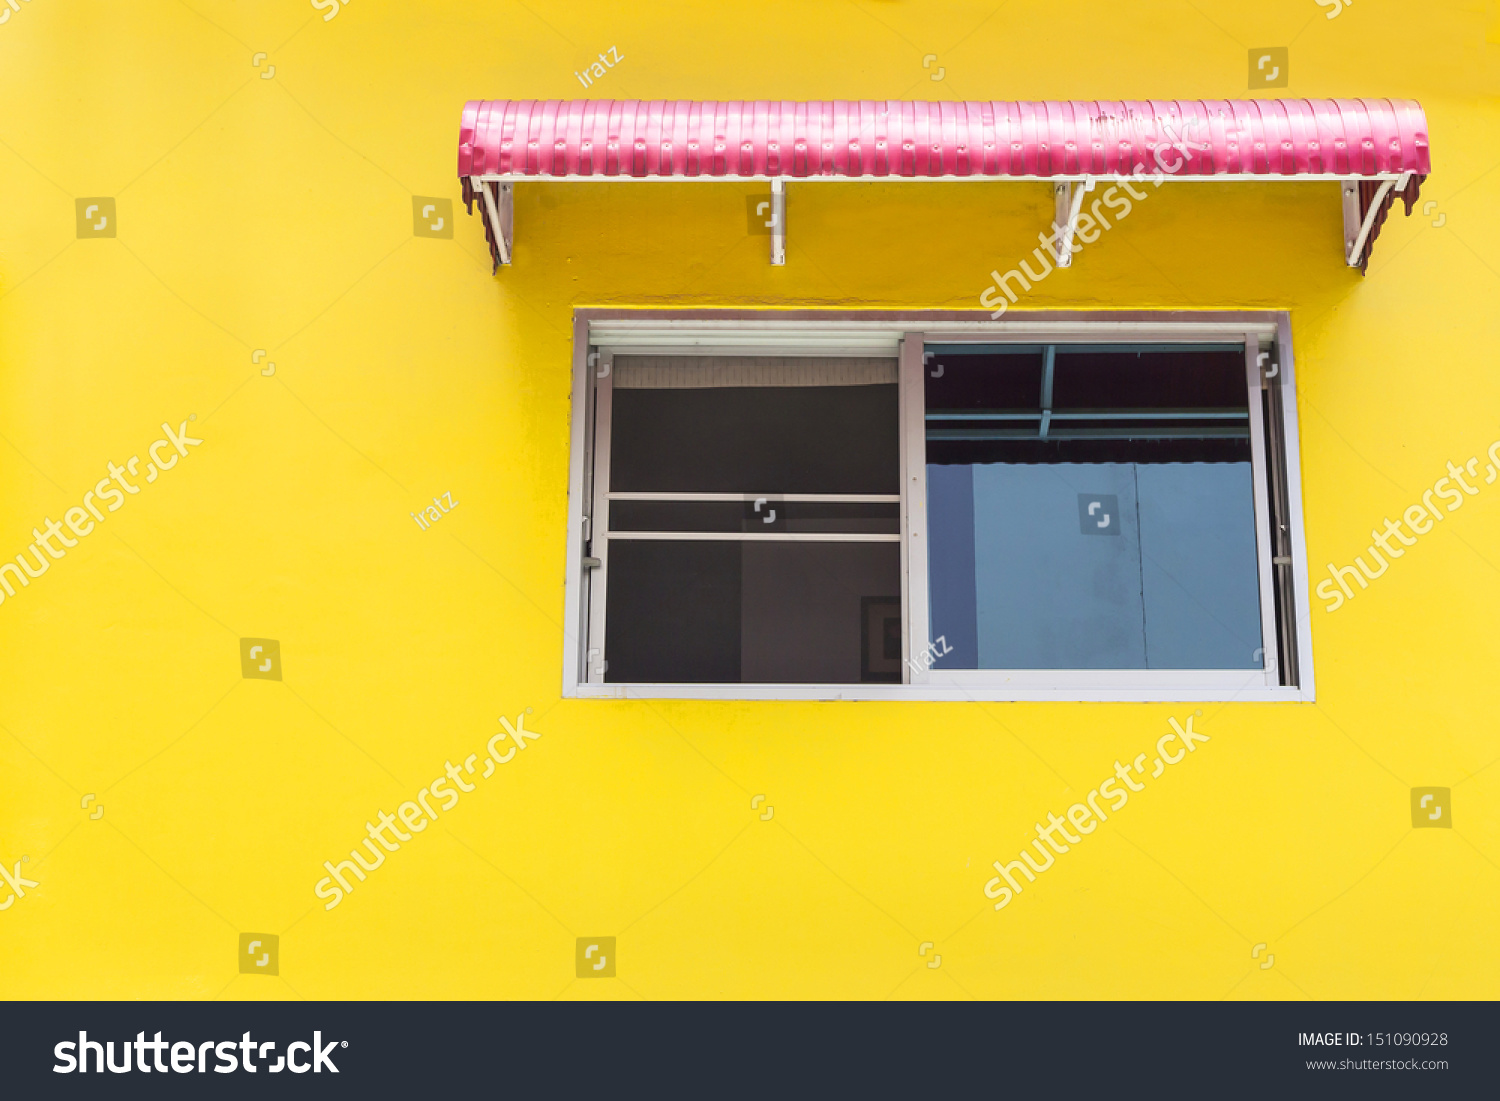 Yellow Wall Red Awning Windows Stock Photo Royalty Free 151090928